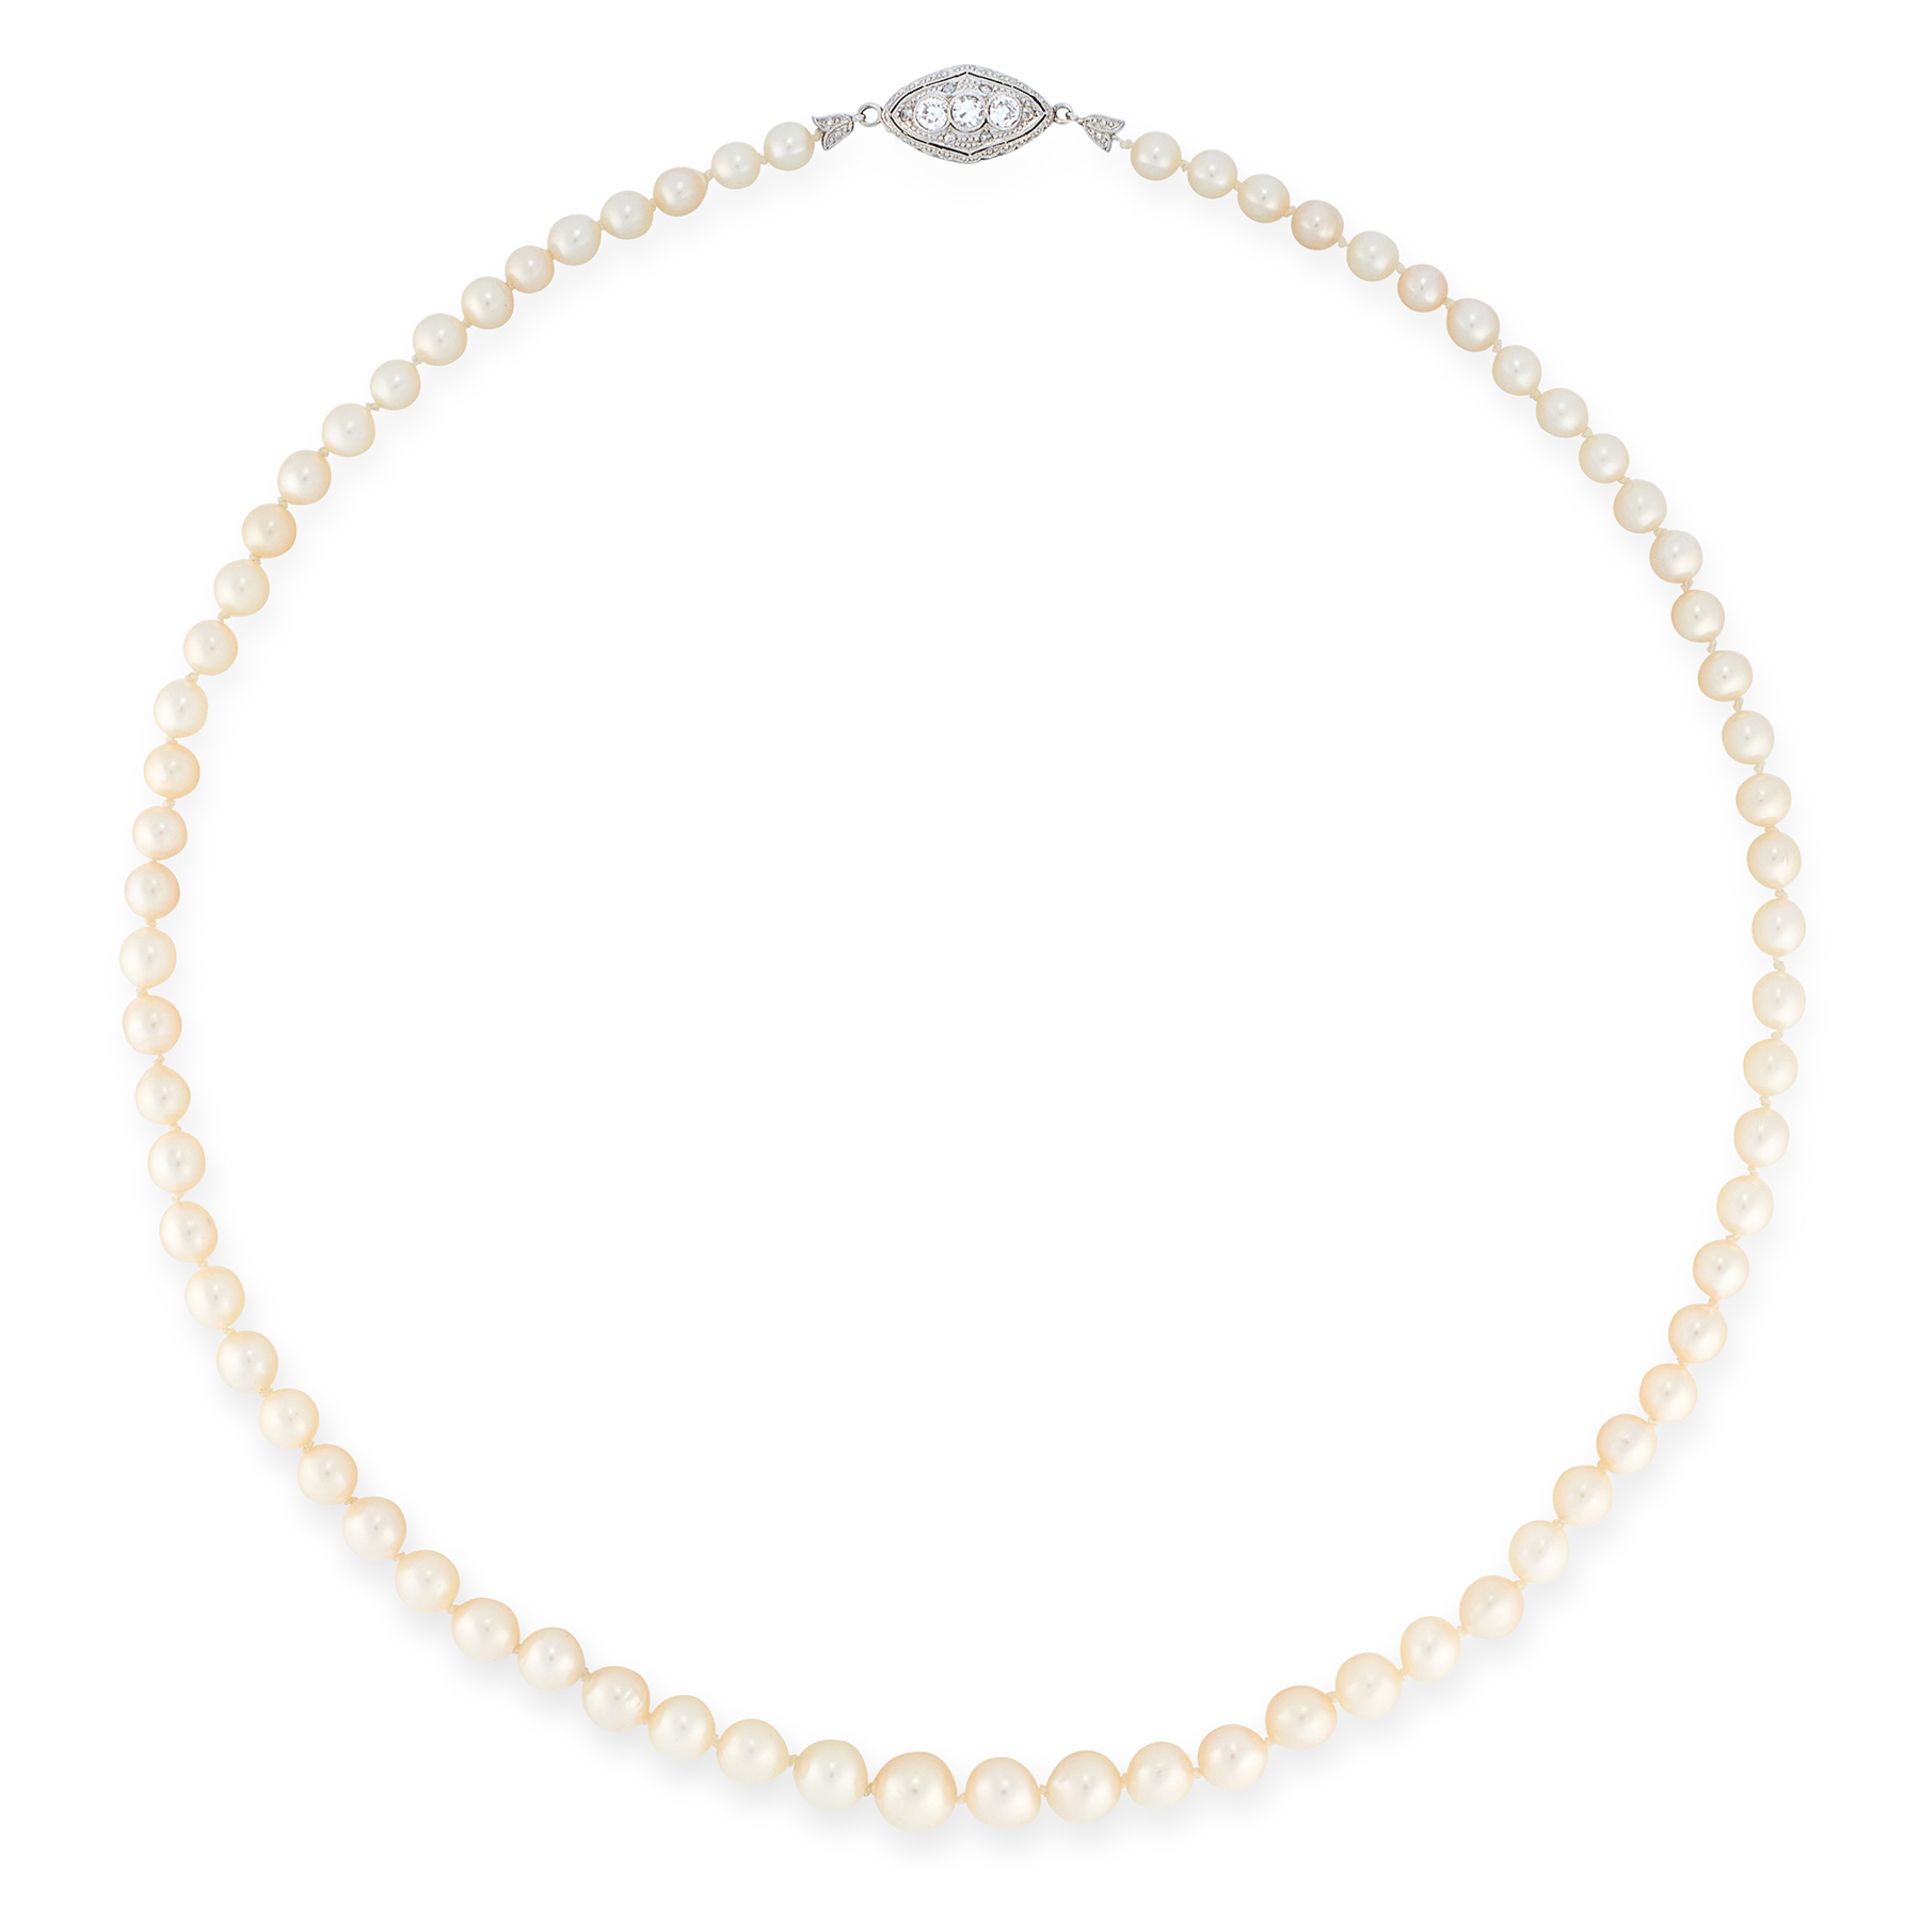 A PEARL AND DIAMOND NECKLACE in 14ct white gold, c